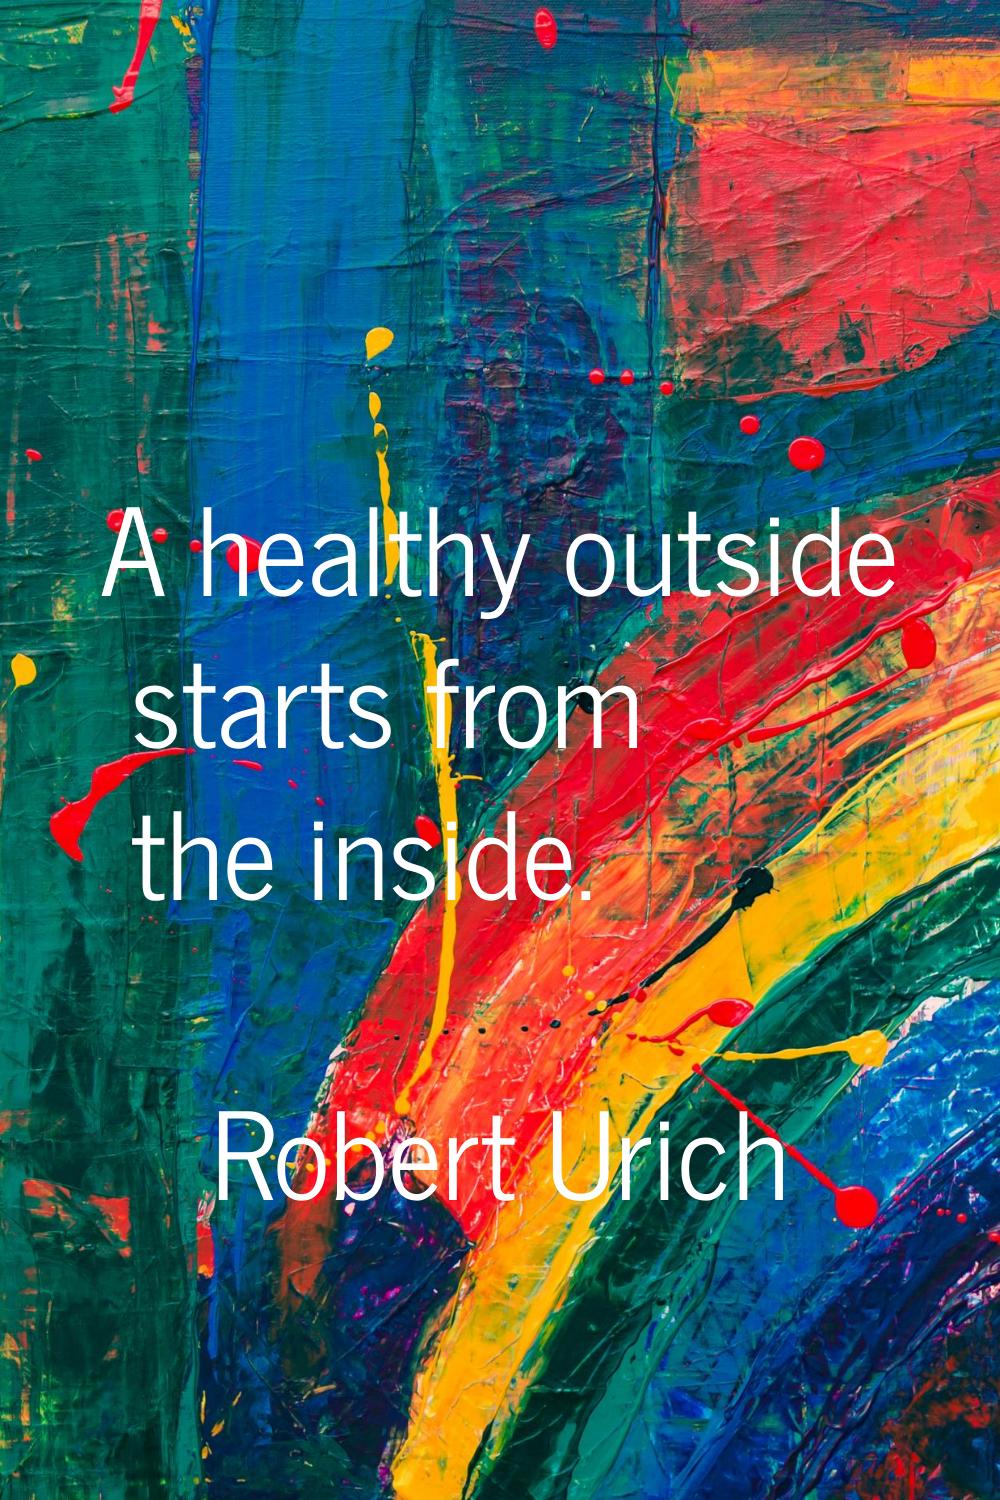 A healthy outside starts from the inside.